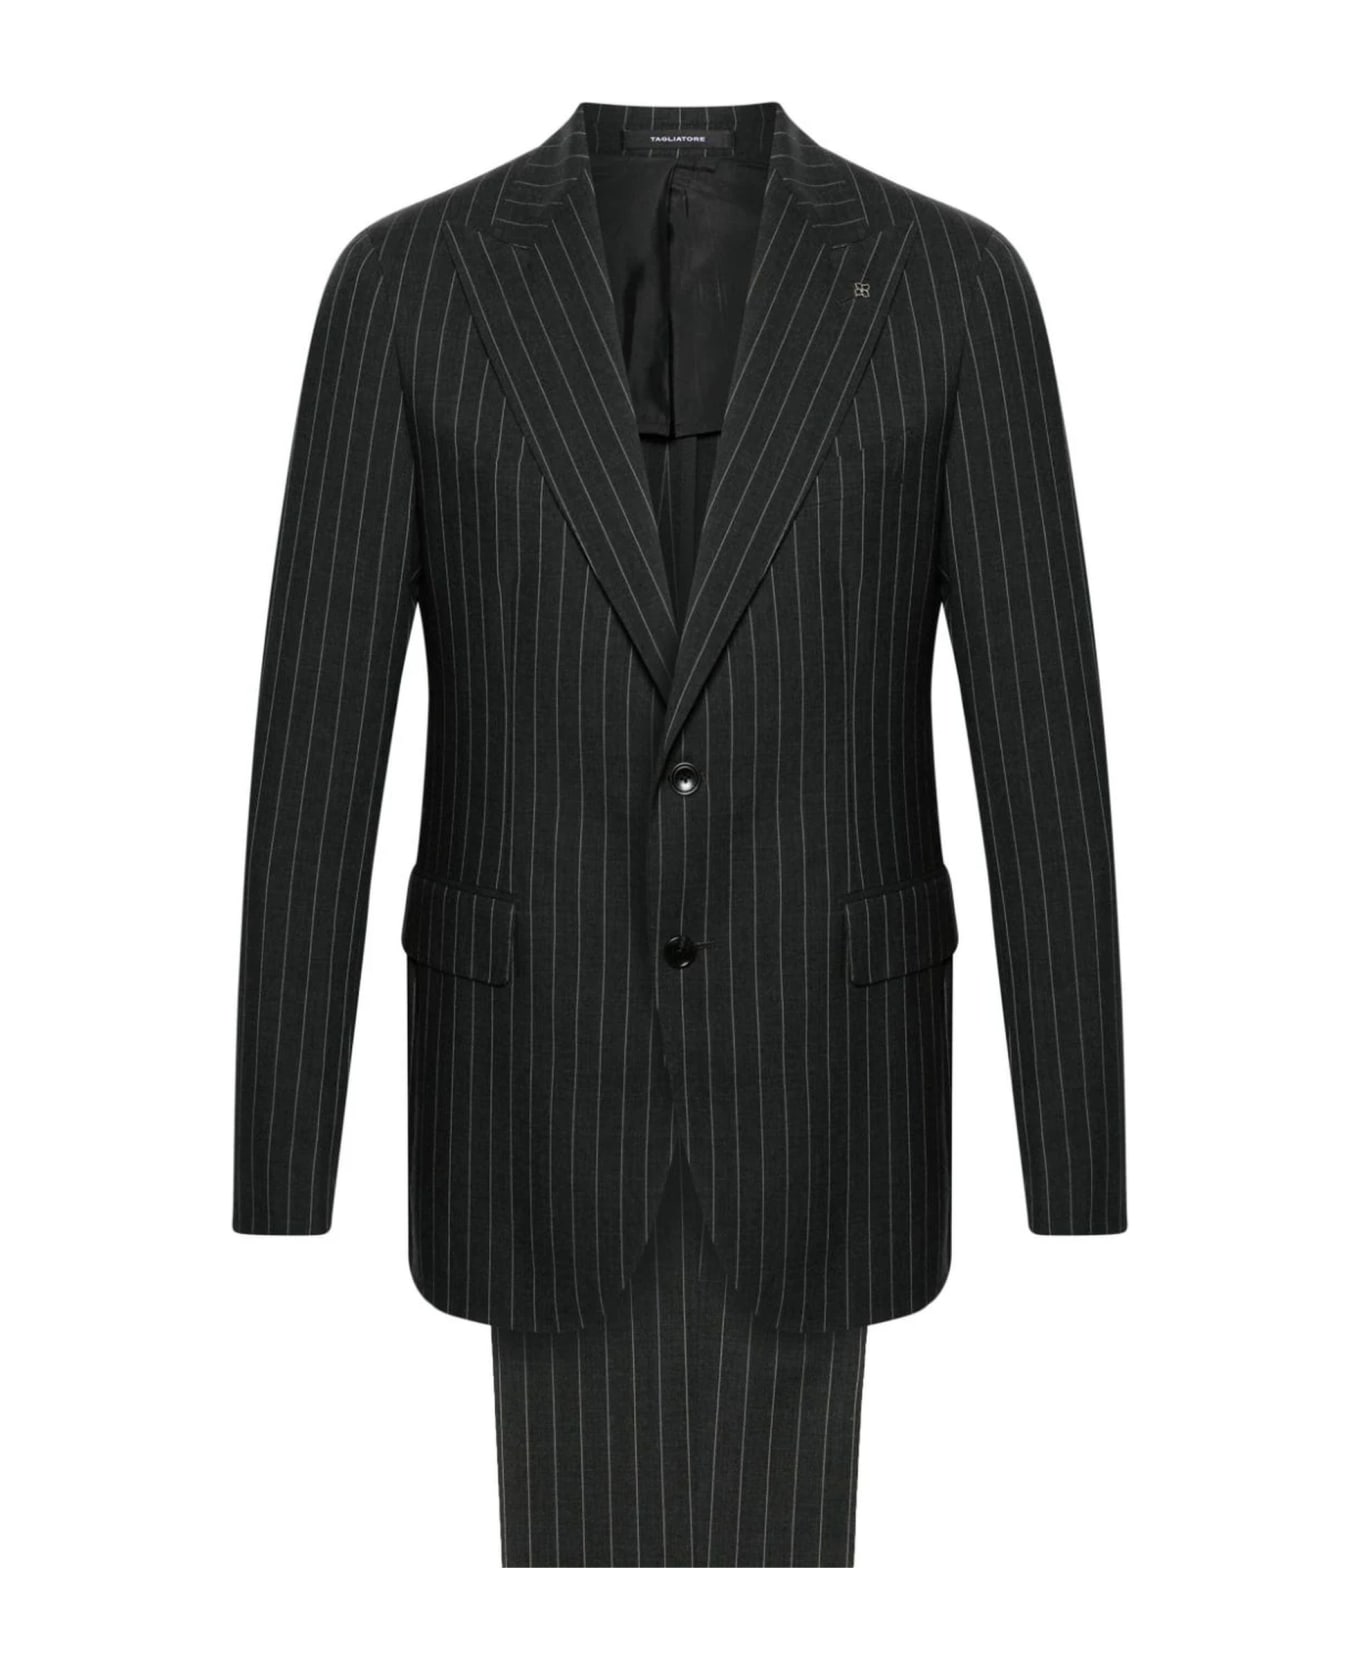 Tagliatore Charcoal Grey Pinstriped Single-breasted Wool Suit - Grey